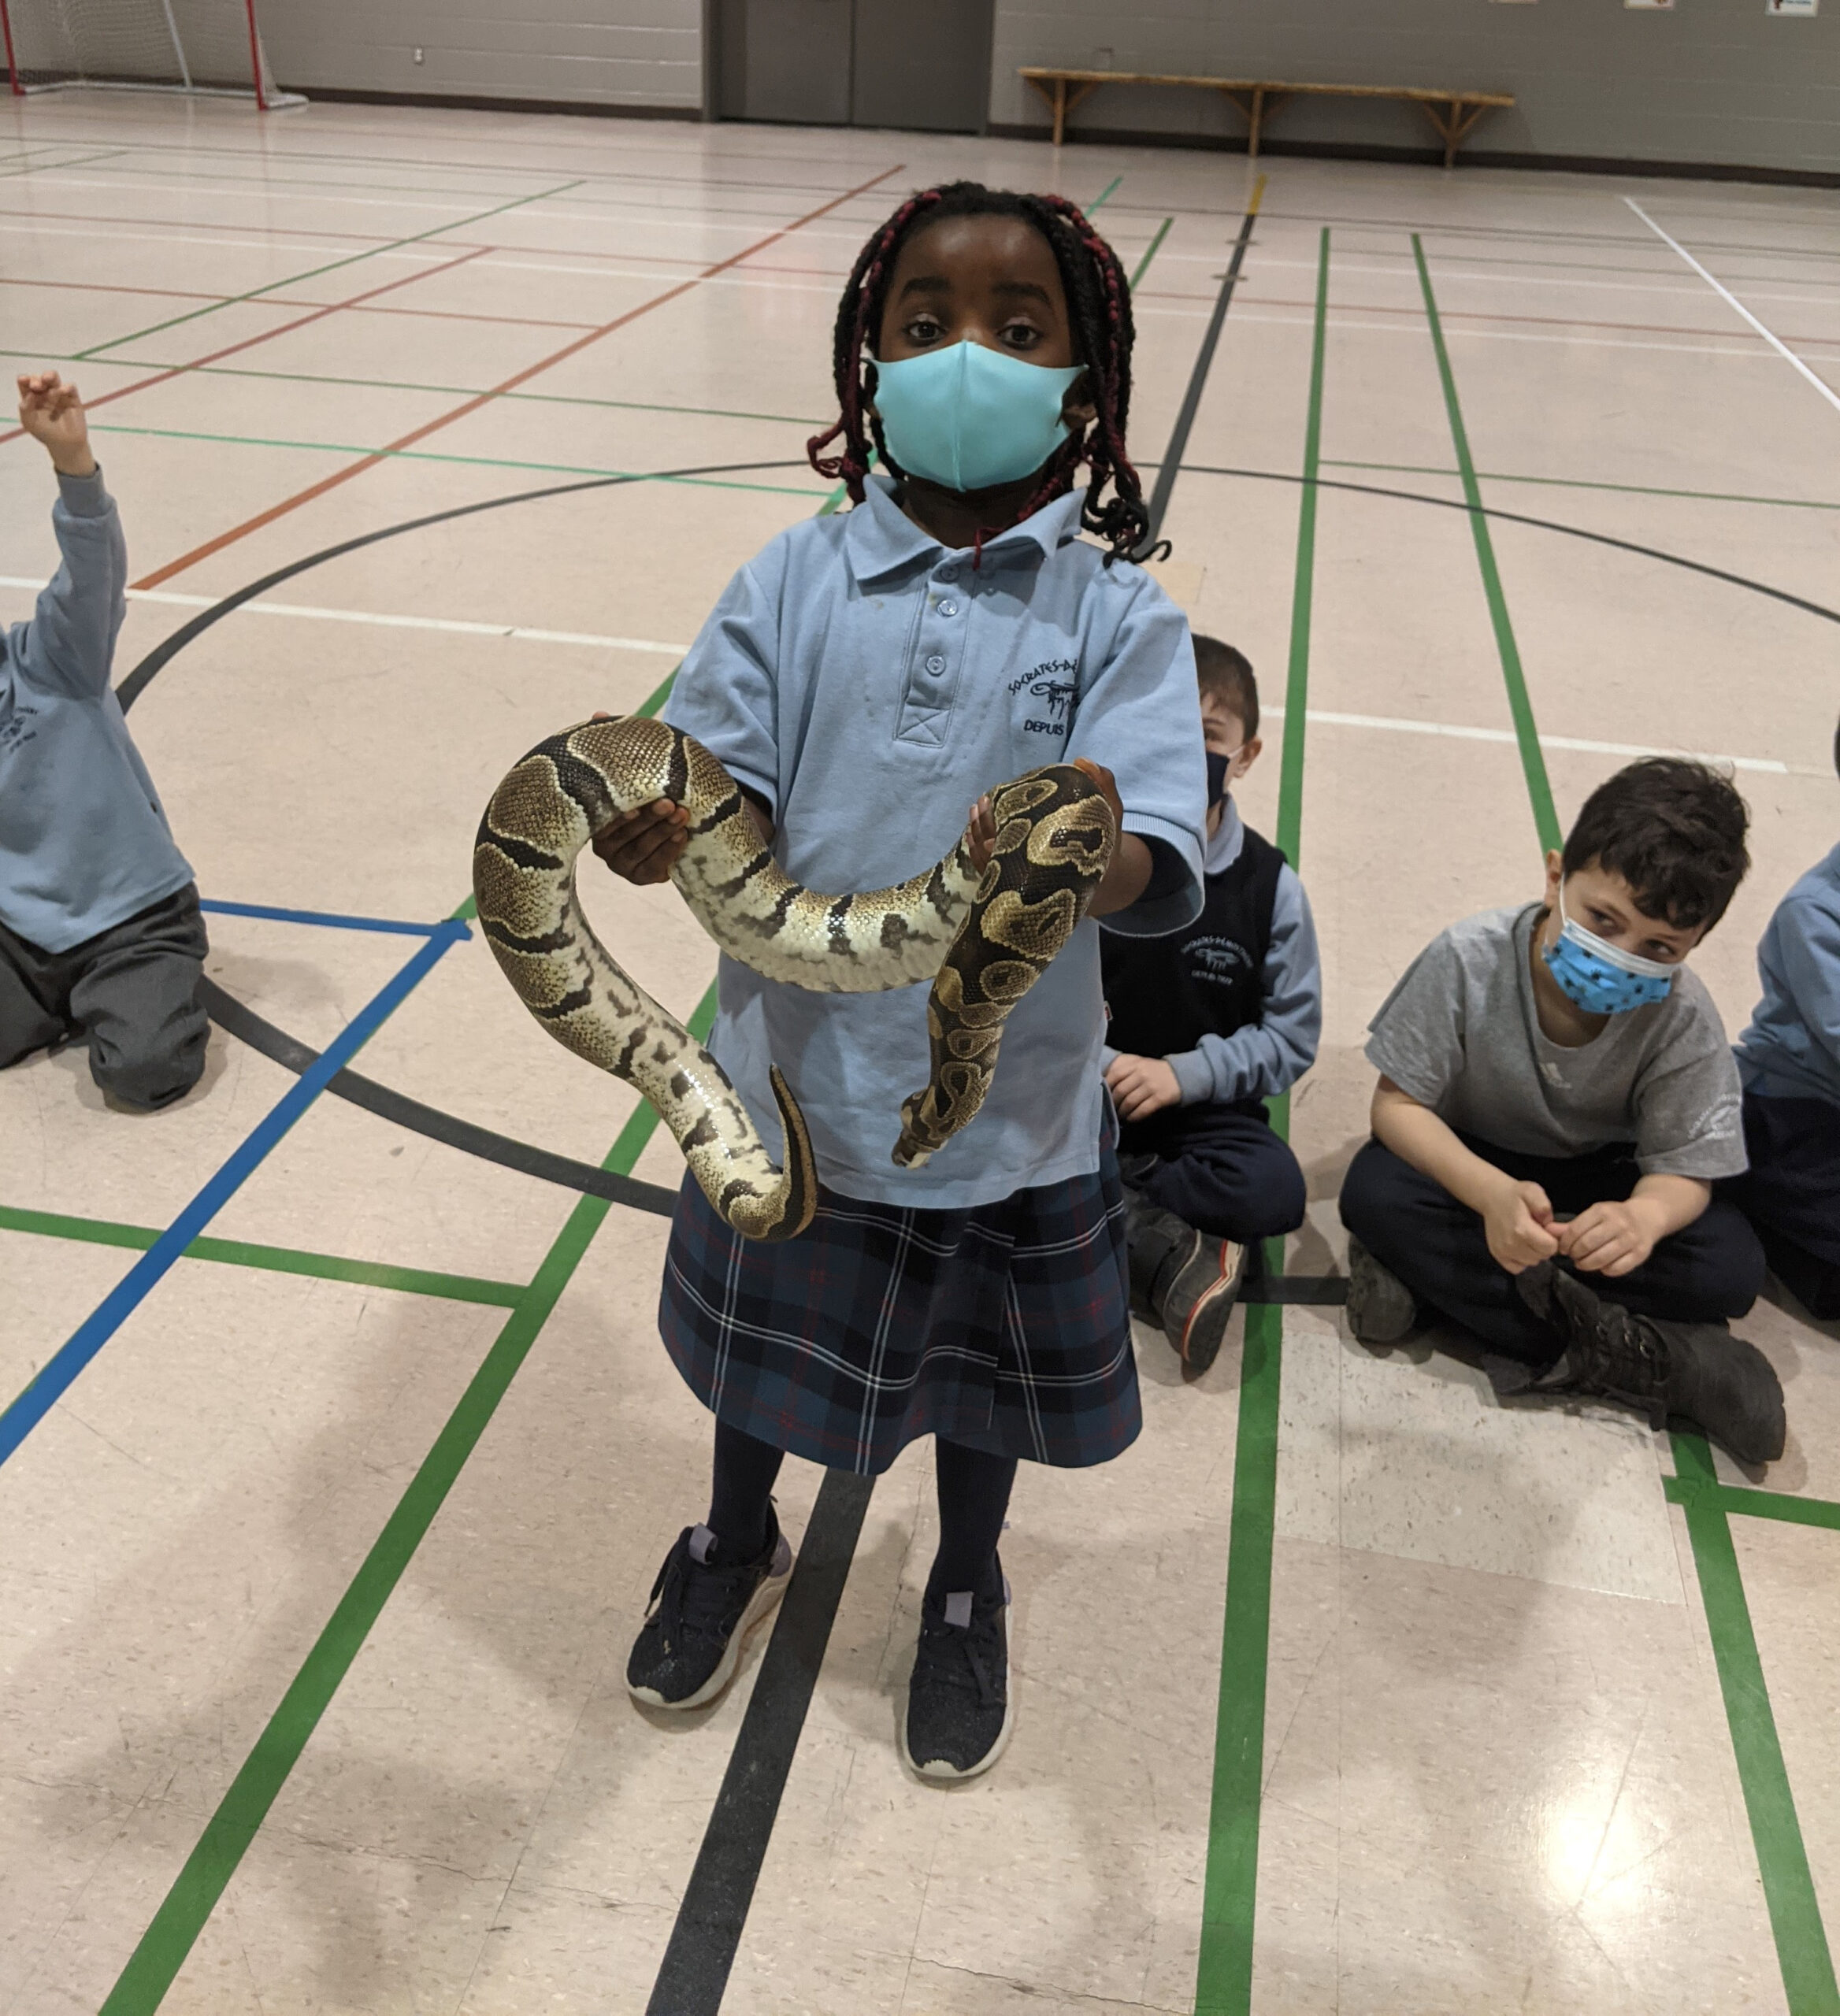 Prof Dino visits Socrates IV – A day of science experiments and reptiles!